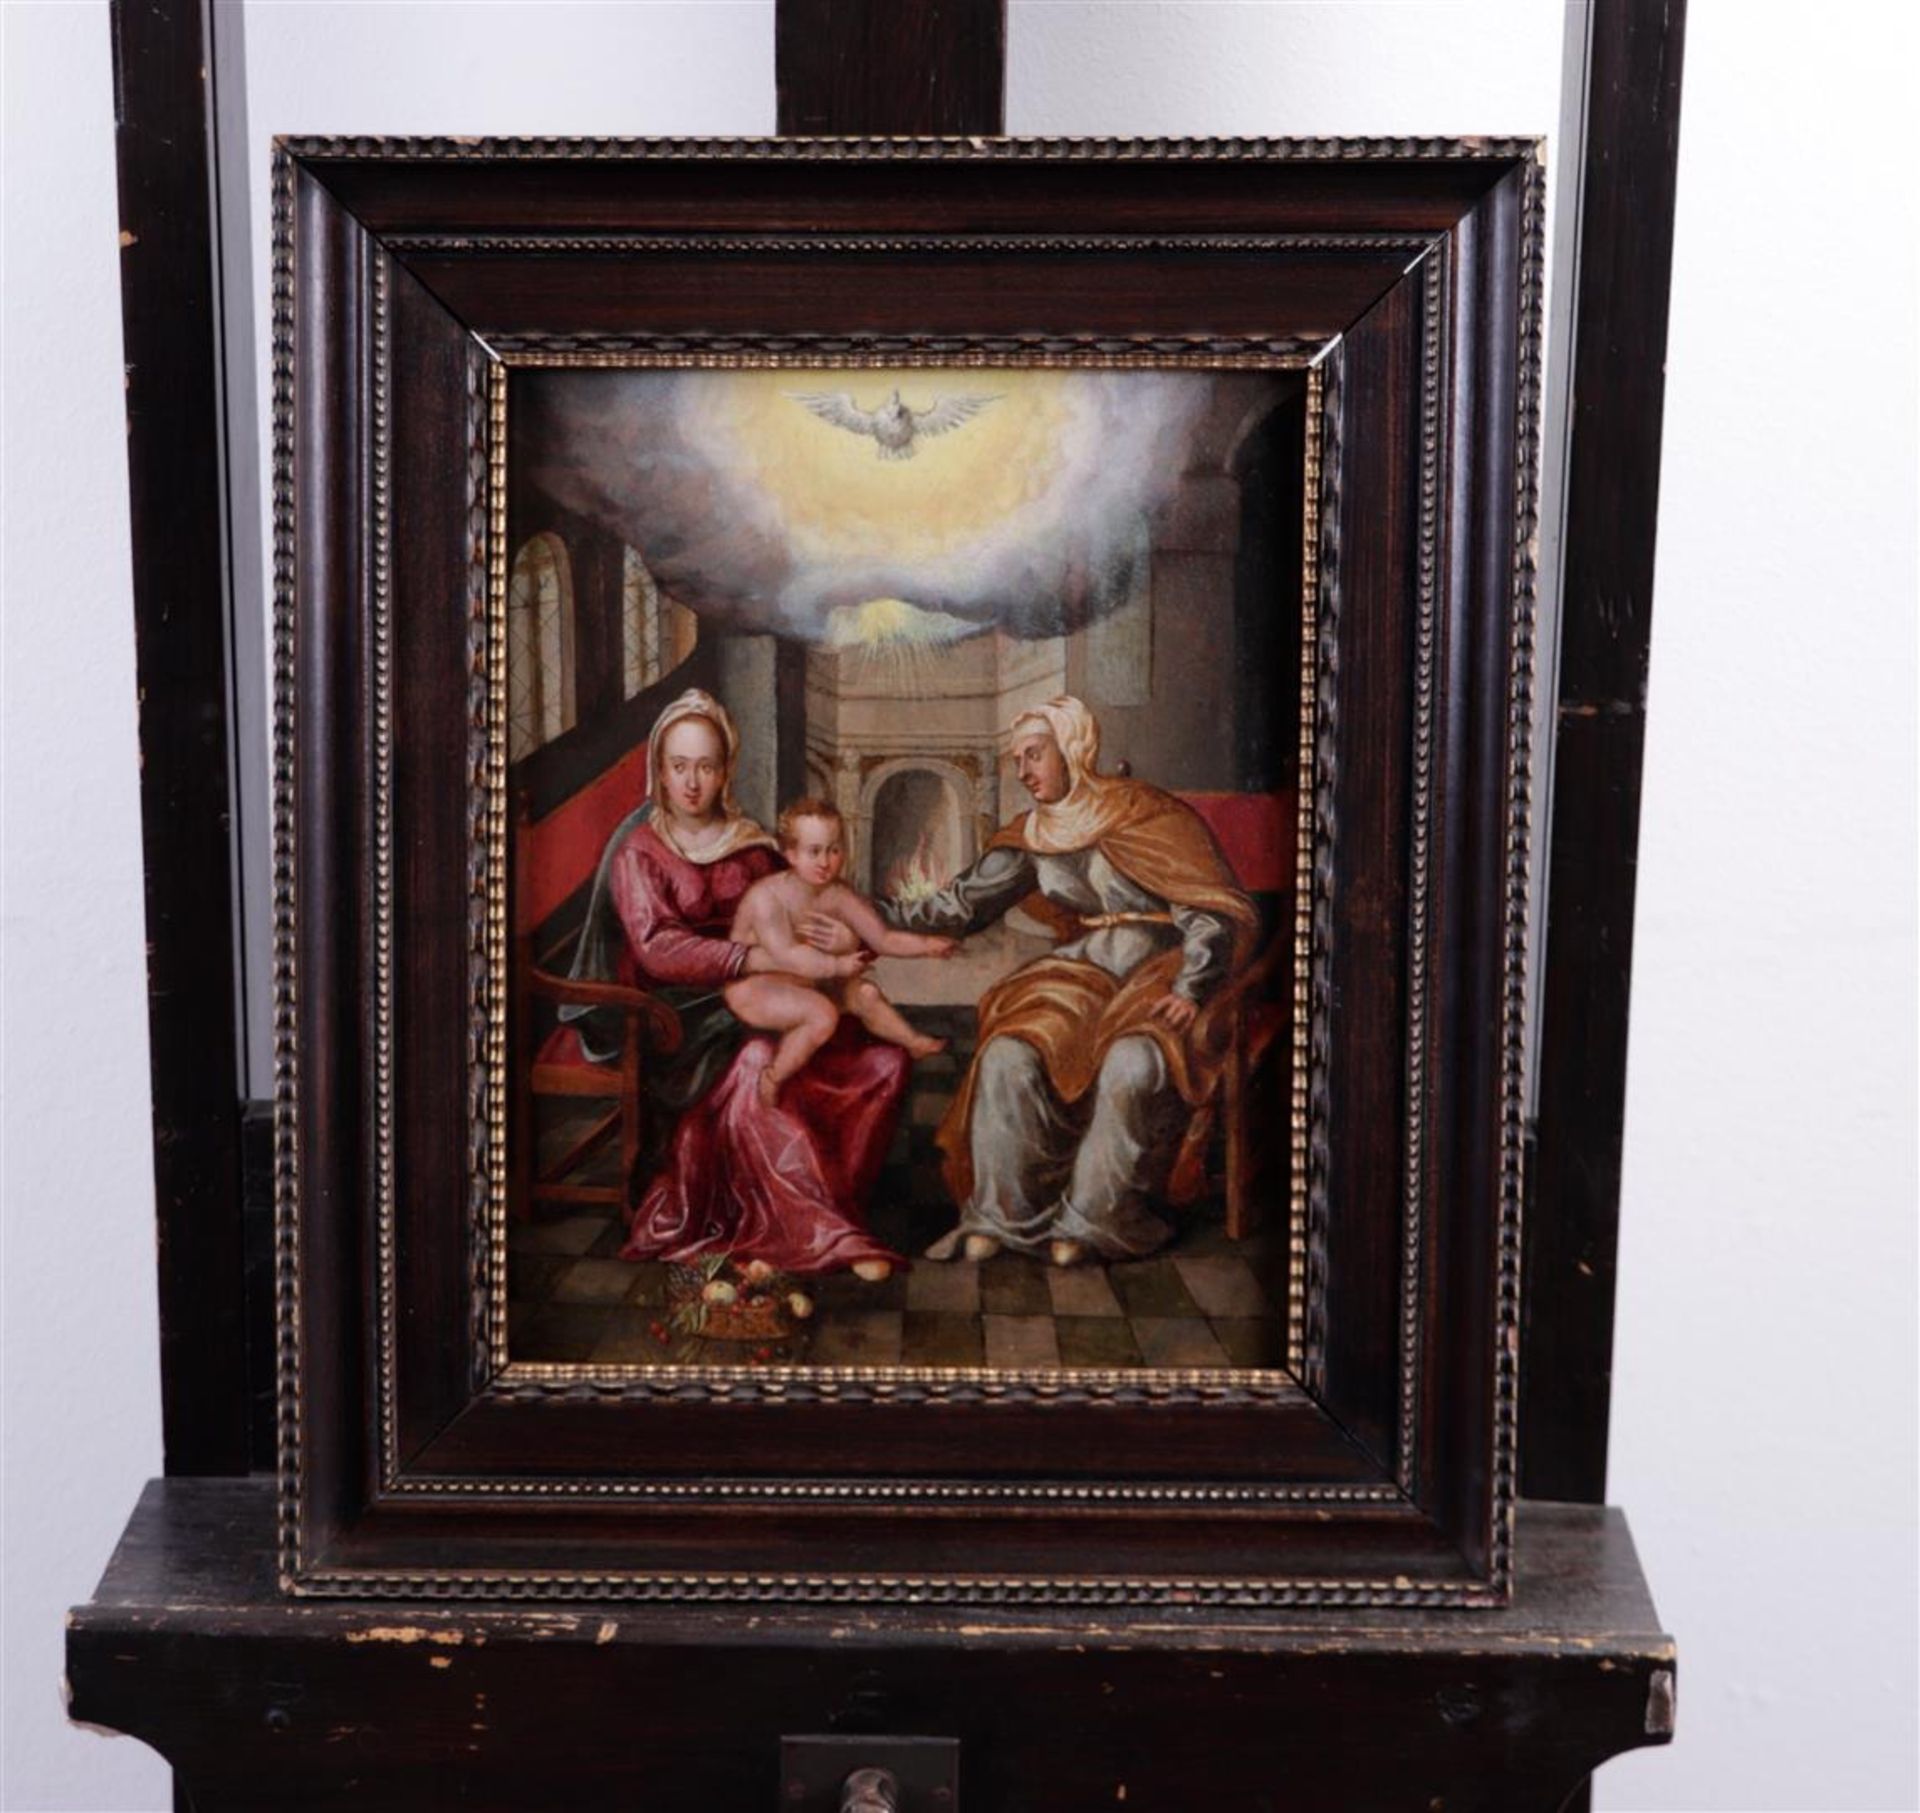 Flemish School, second half of the 17th century, Anna three with the Holy Spirit, oil on panel, pane - Image 2 of 3